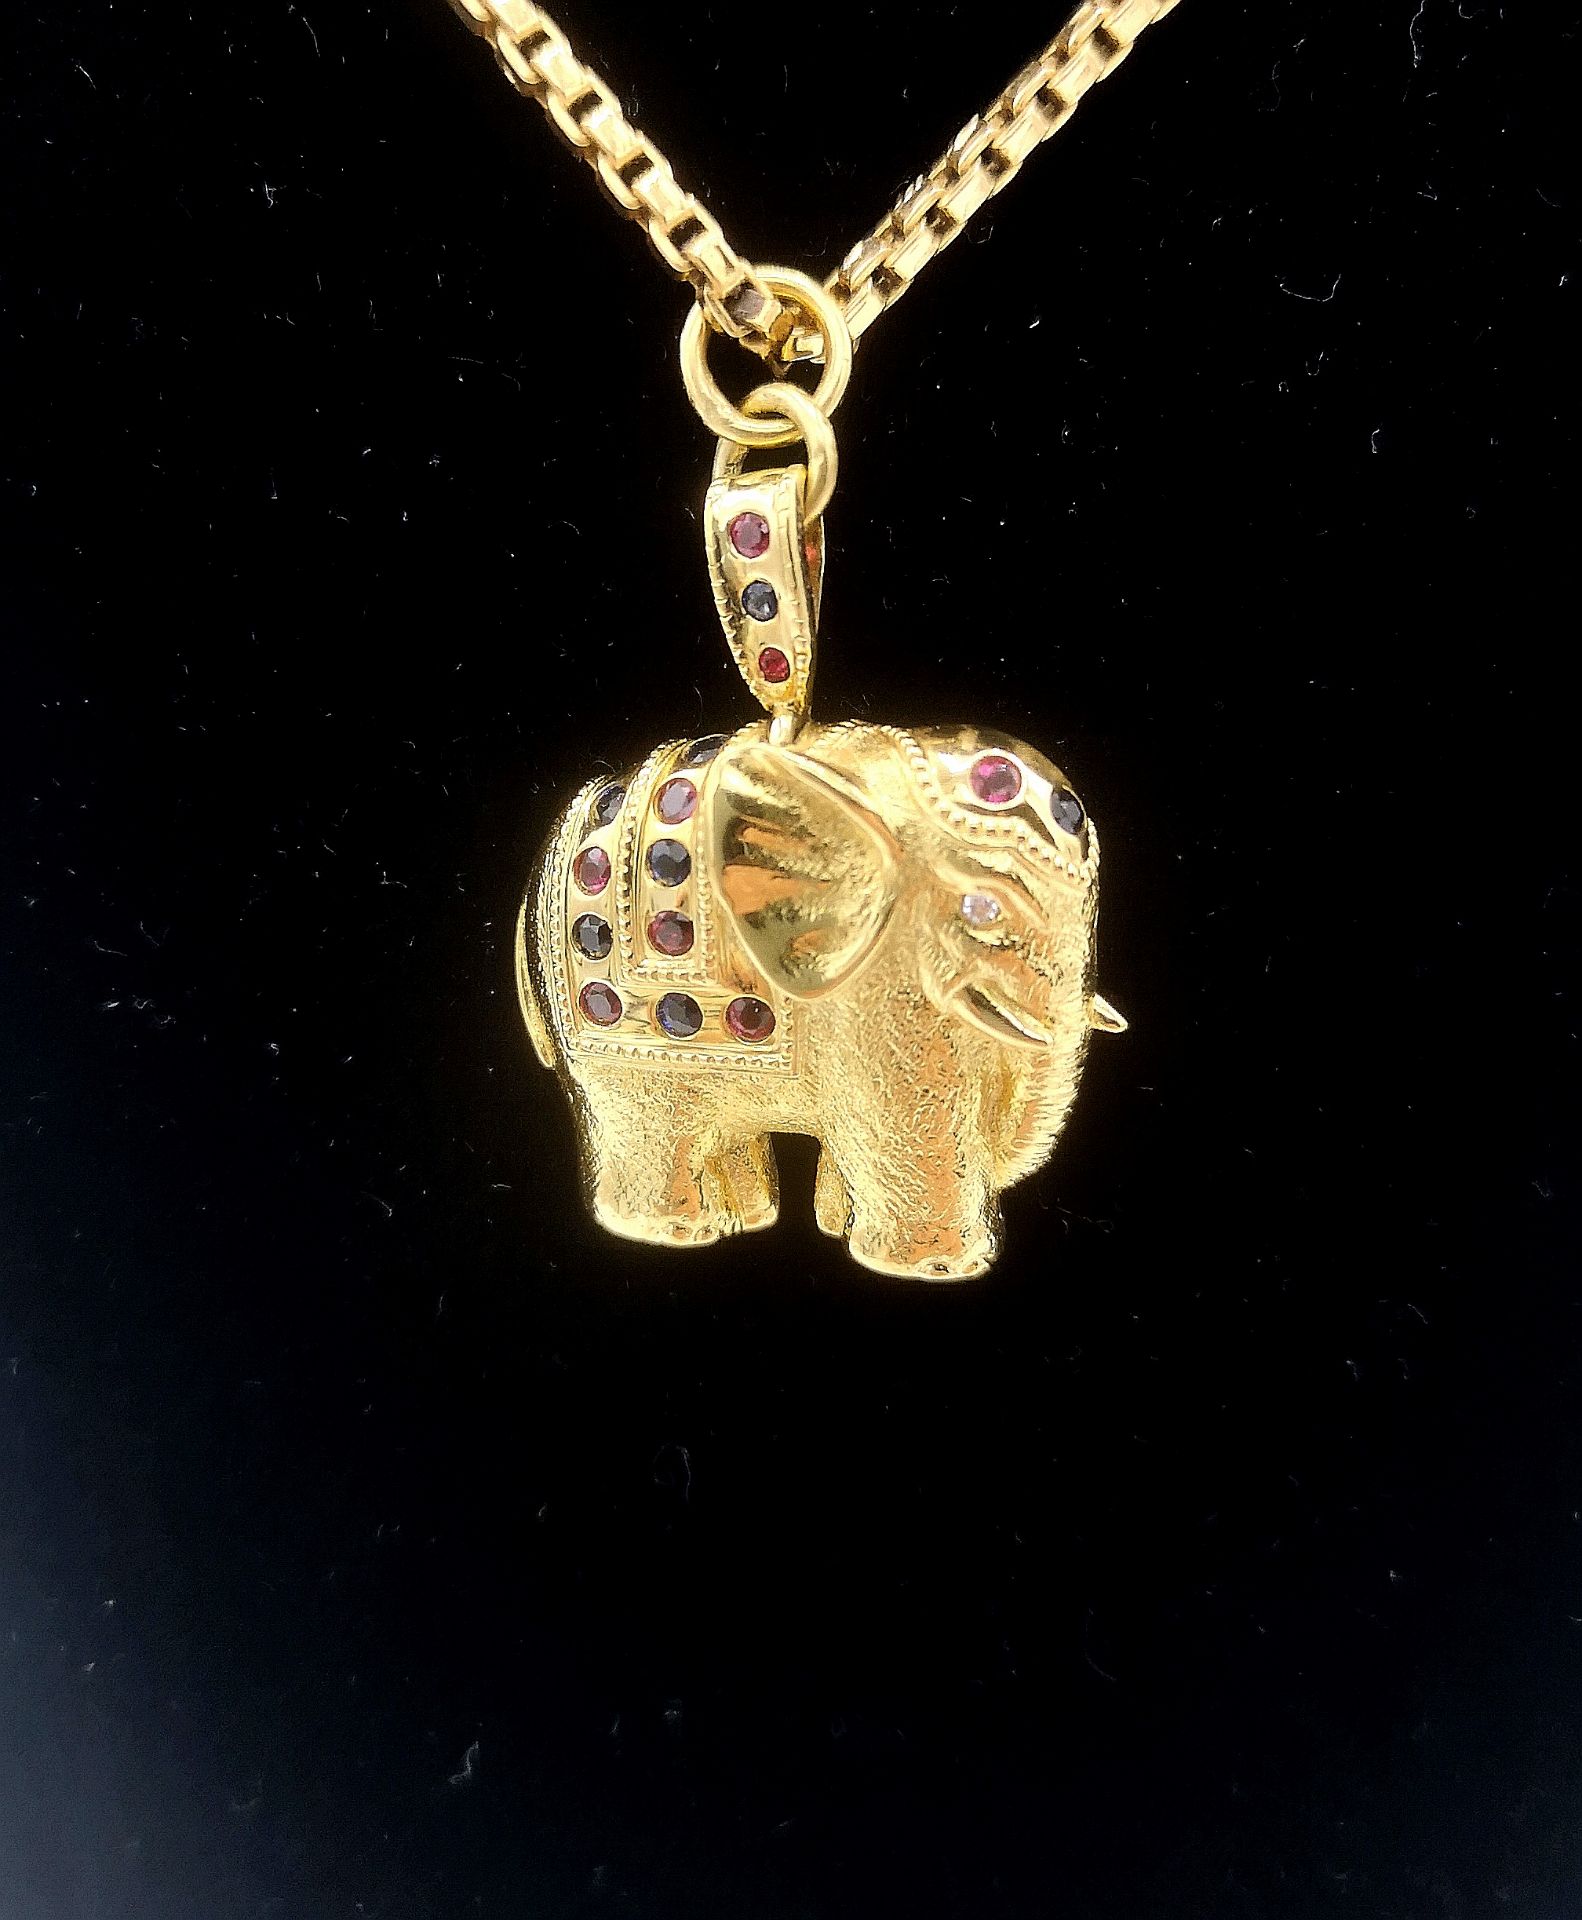 18ct gold elephant pendant set with gemstones on 18ct gold chain - Image 3 of 11